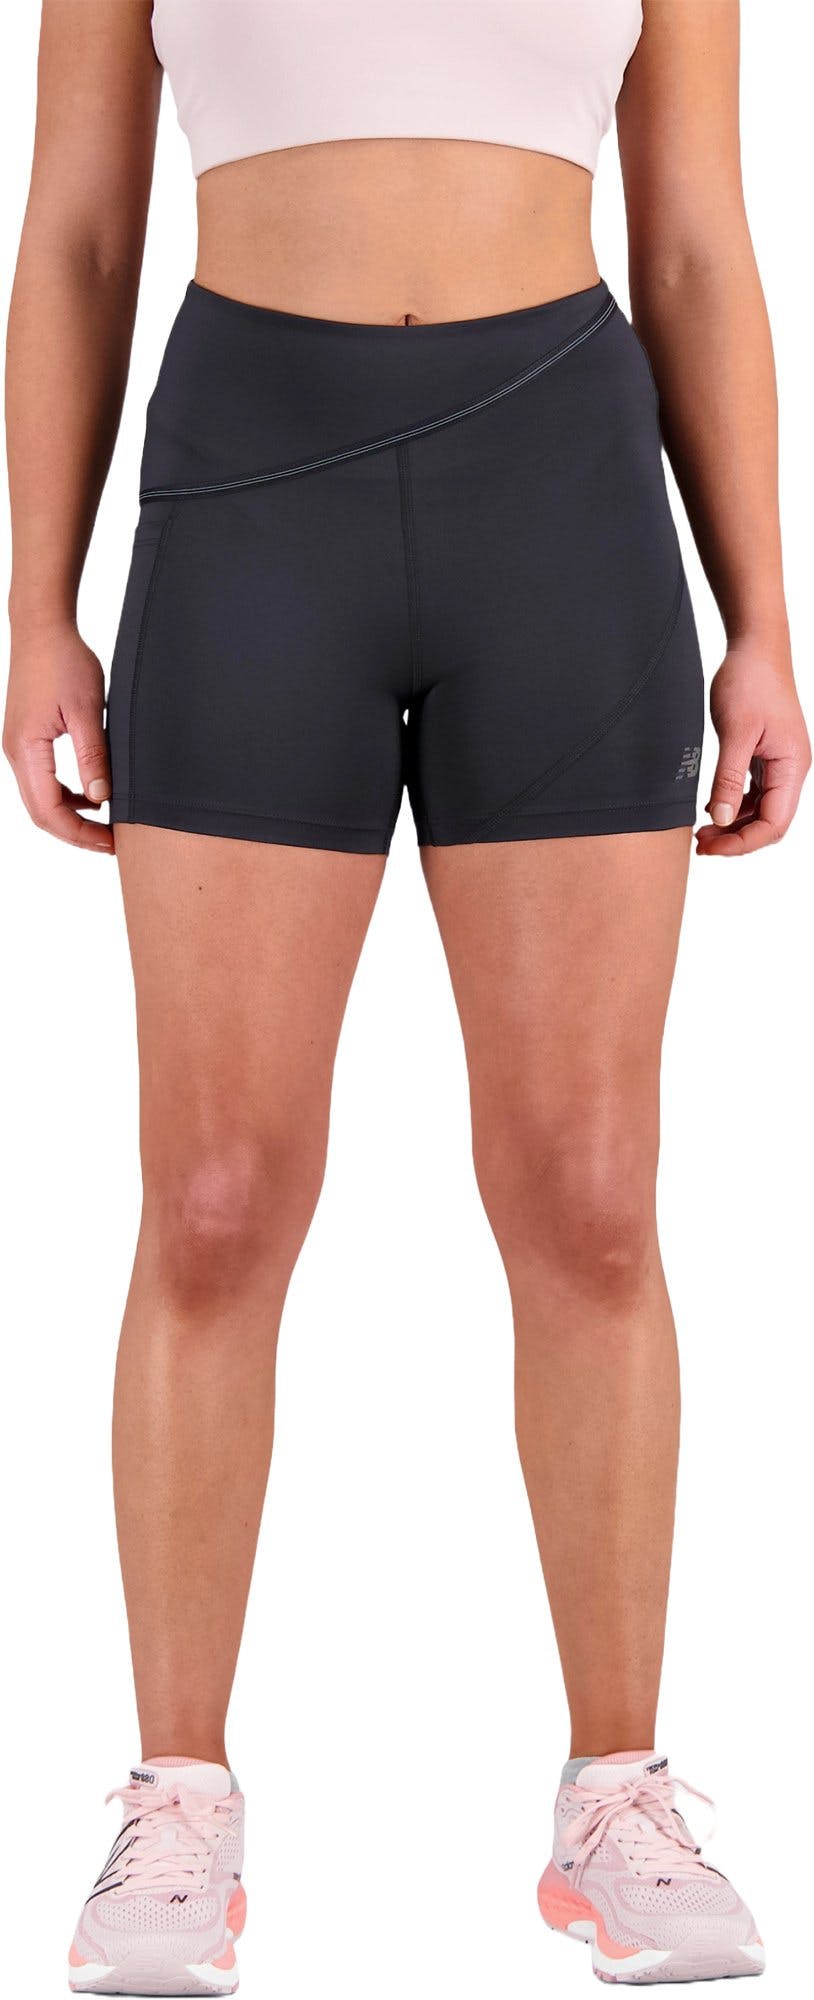 Product image for Q Speed Shape Shield 3 Inch Fitted Short - Women's